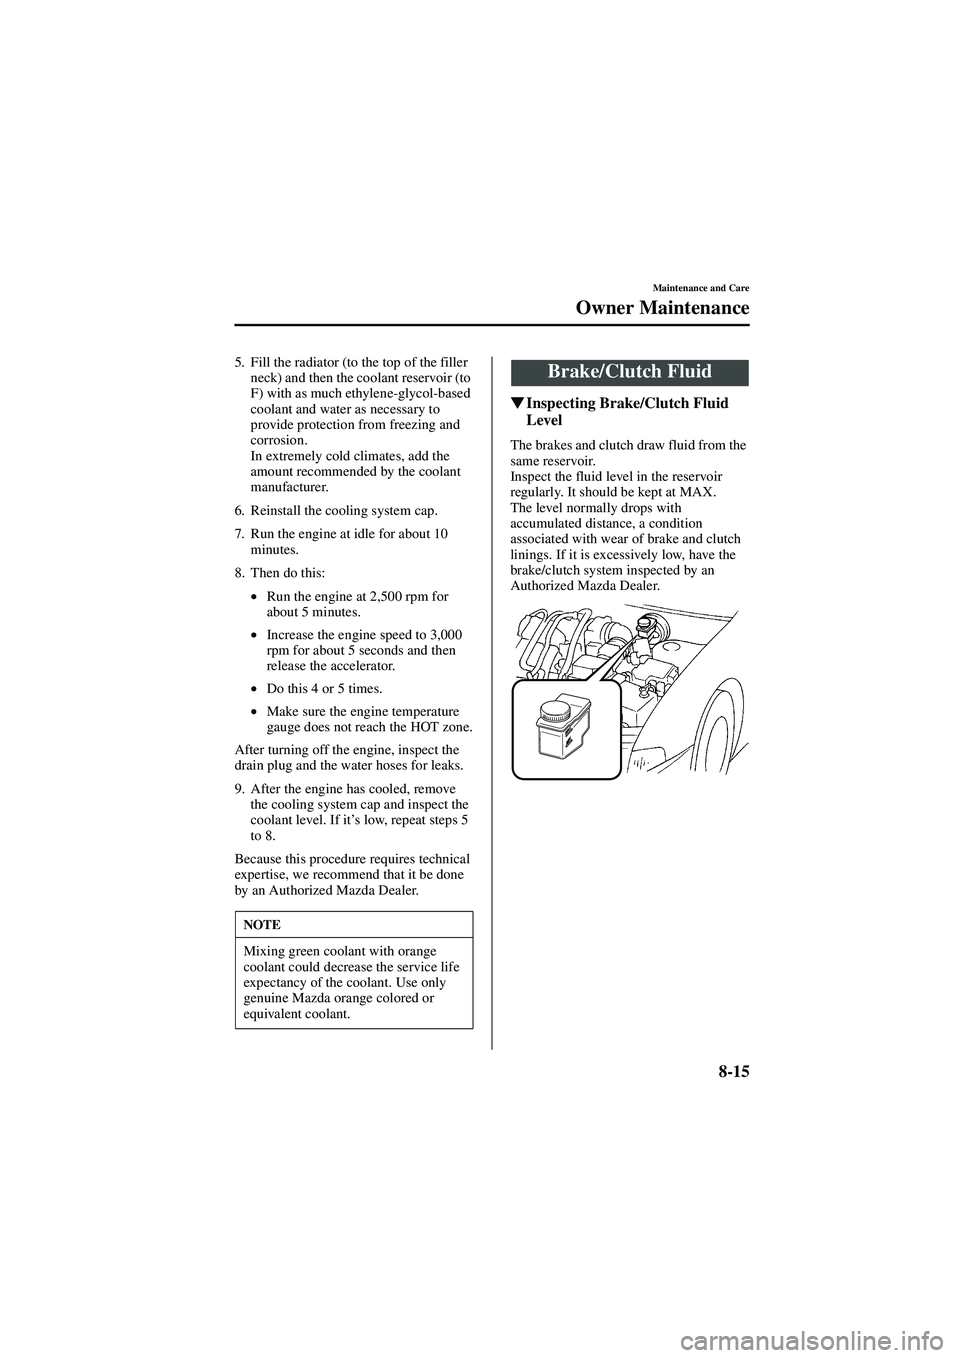 MAZDA MODEL 626 2002  Owners Manual 8-15
Maintenance and Care
Owner Maintenance
Form No. 8Q50-EA-01G
5. Fill the radiator (to the top of the filler neck) and then the coolant reservoir (to 
F) with as much ethylene-glycol-based 
coolant